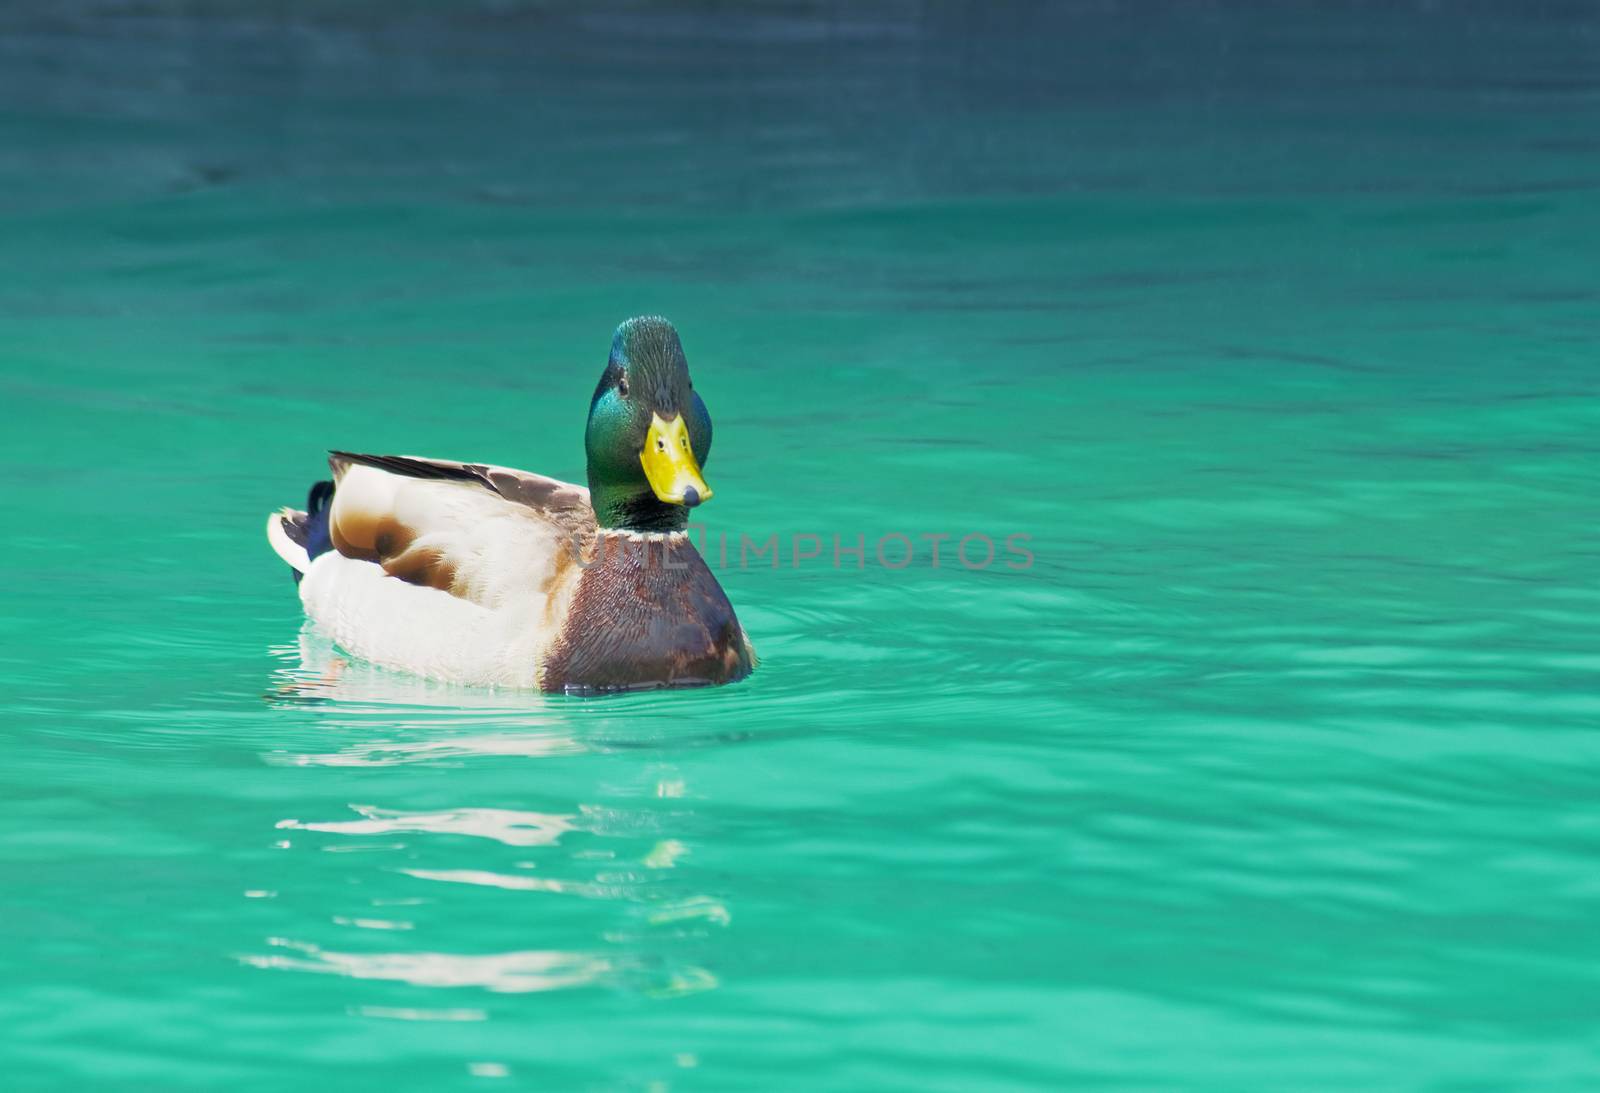  swimming duck by vrvalerian